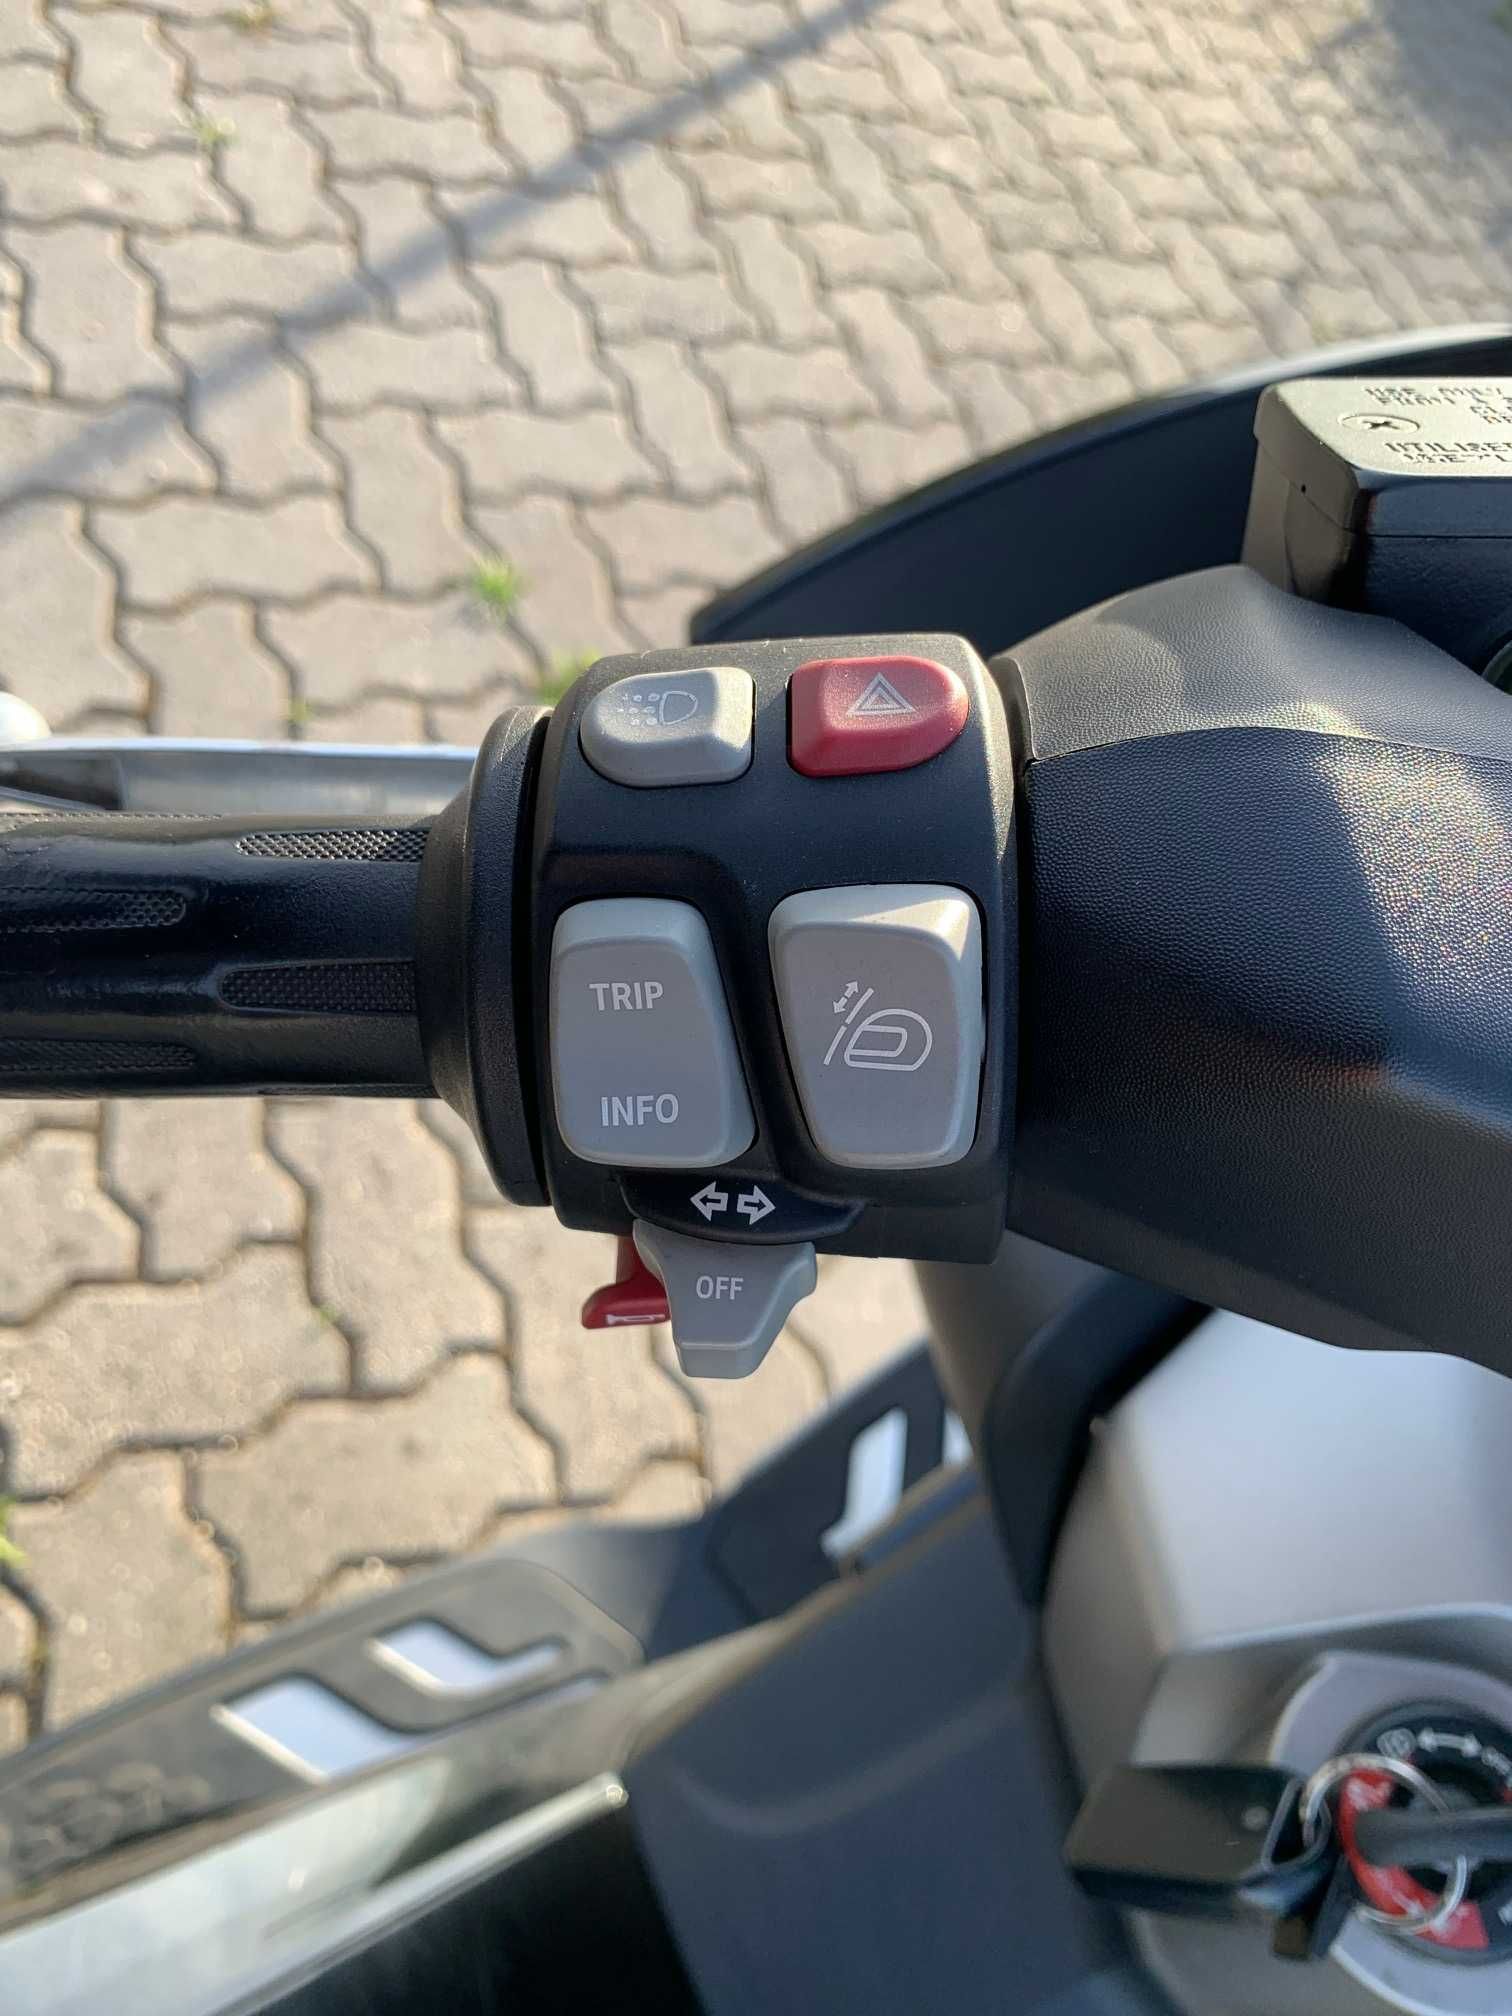 BMW C650 GT MAXI SCOOTER